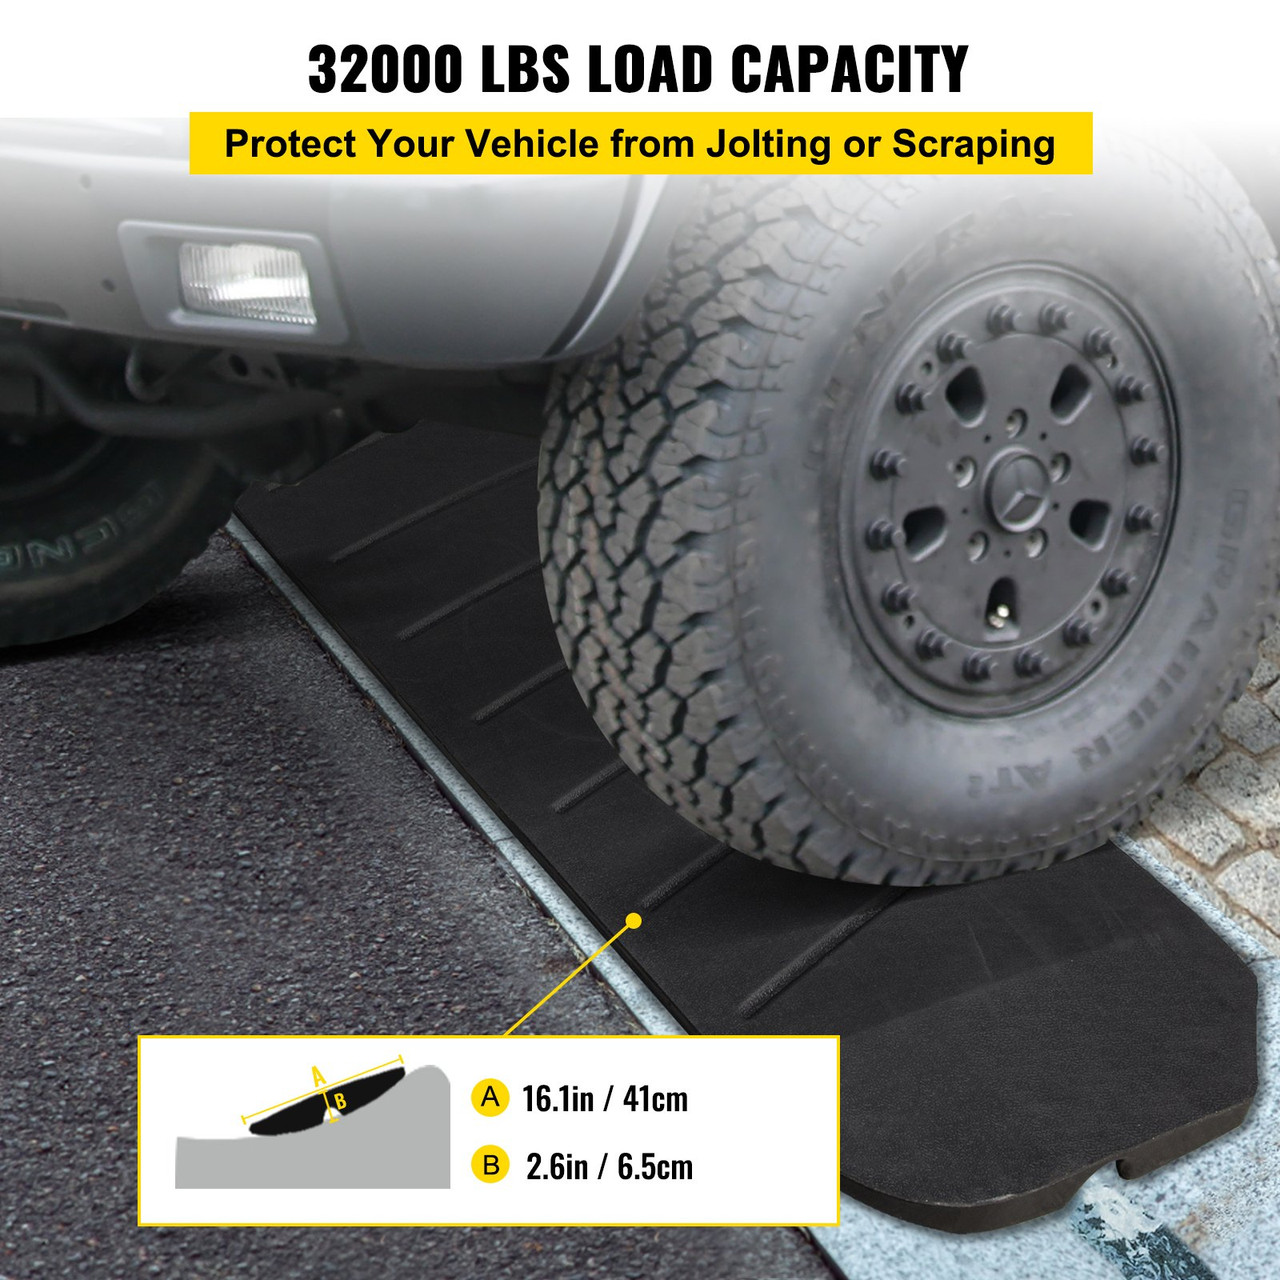 Curb Ramp, 3 Pack Rubber Driveway Ramps, Heavy Duty 32000 lbs Weight Capacity Threshold Ramp, 2.6 inch High Curbside Bridge Ramps for Loading Dock Garage Sidewalk, Expandable Full Ramp Set